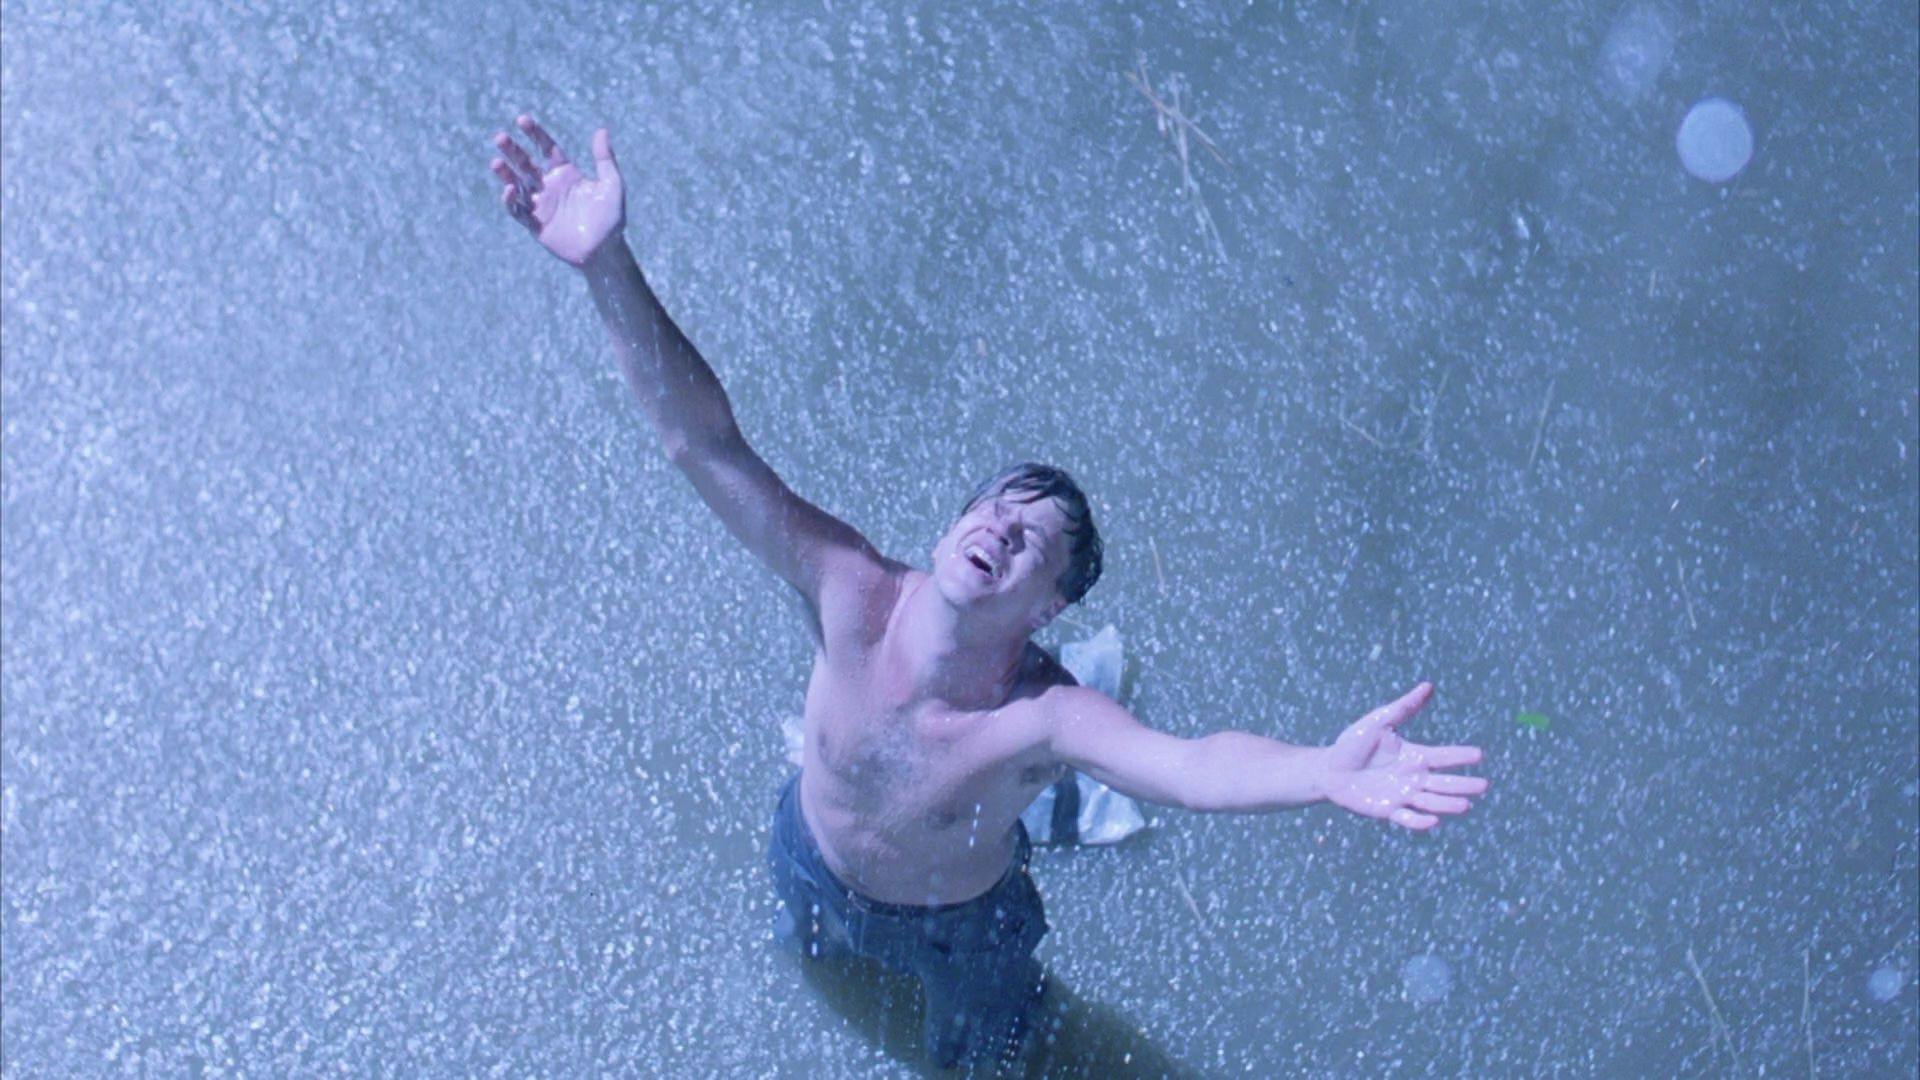 A scene from the Shawshank Redemption